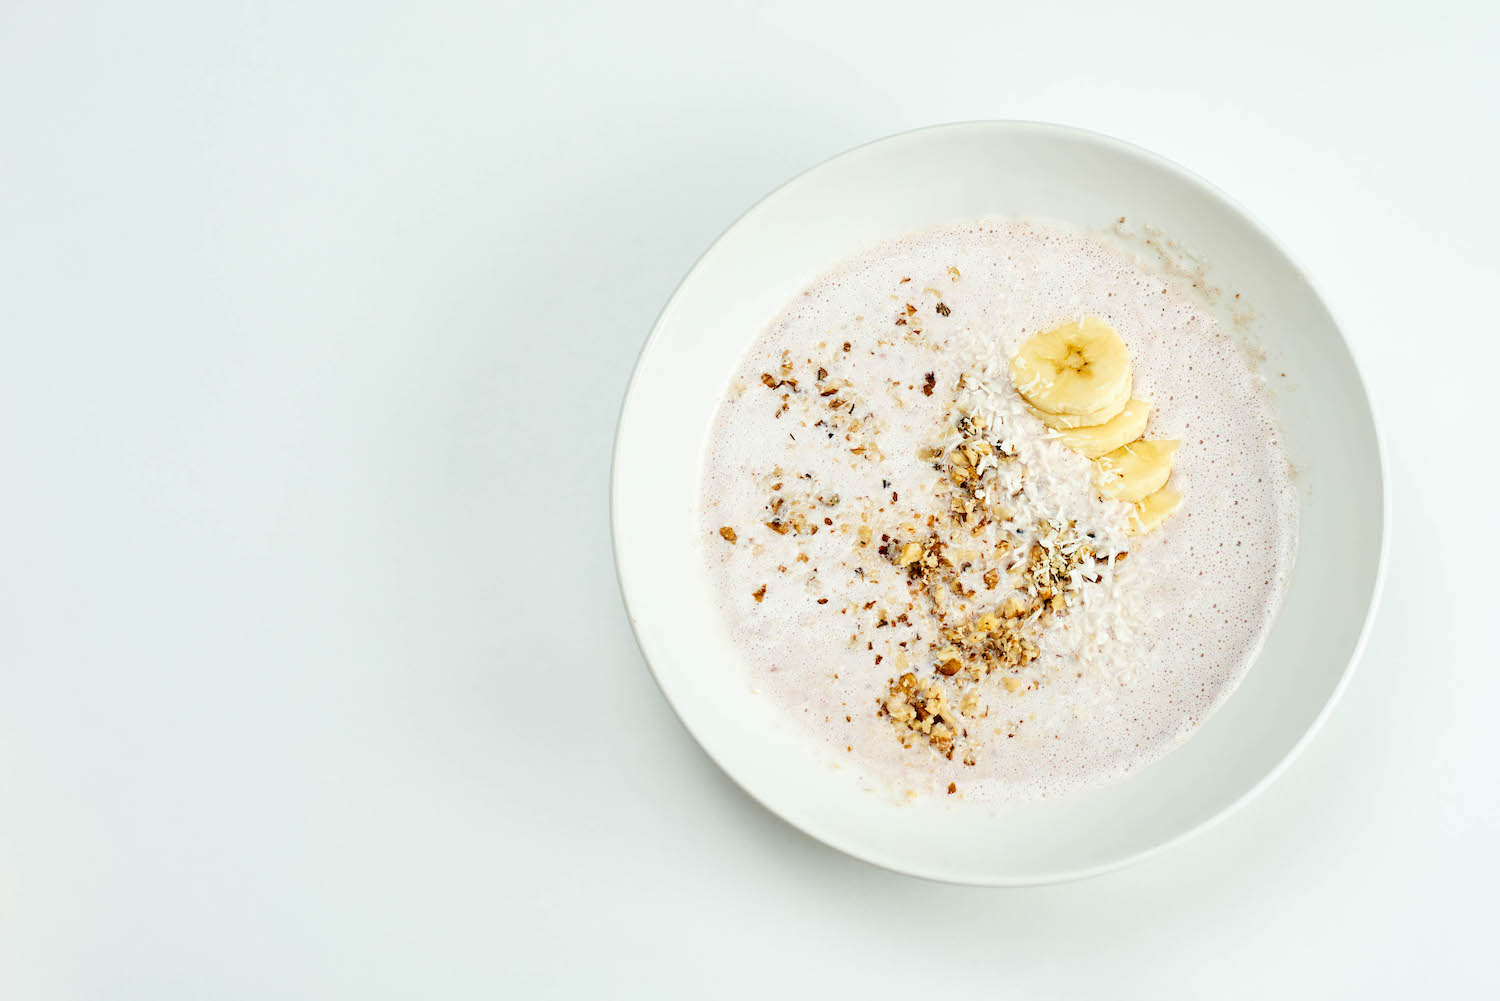 A bowl of refreshing banana and oats smoothie based smoothie with walnut shreds